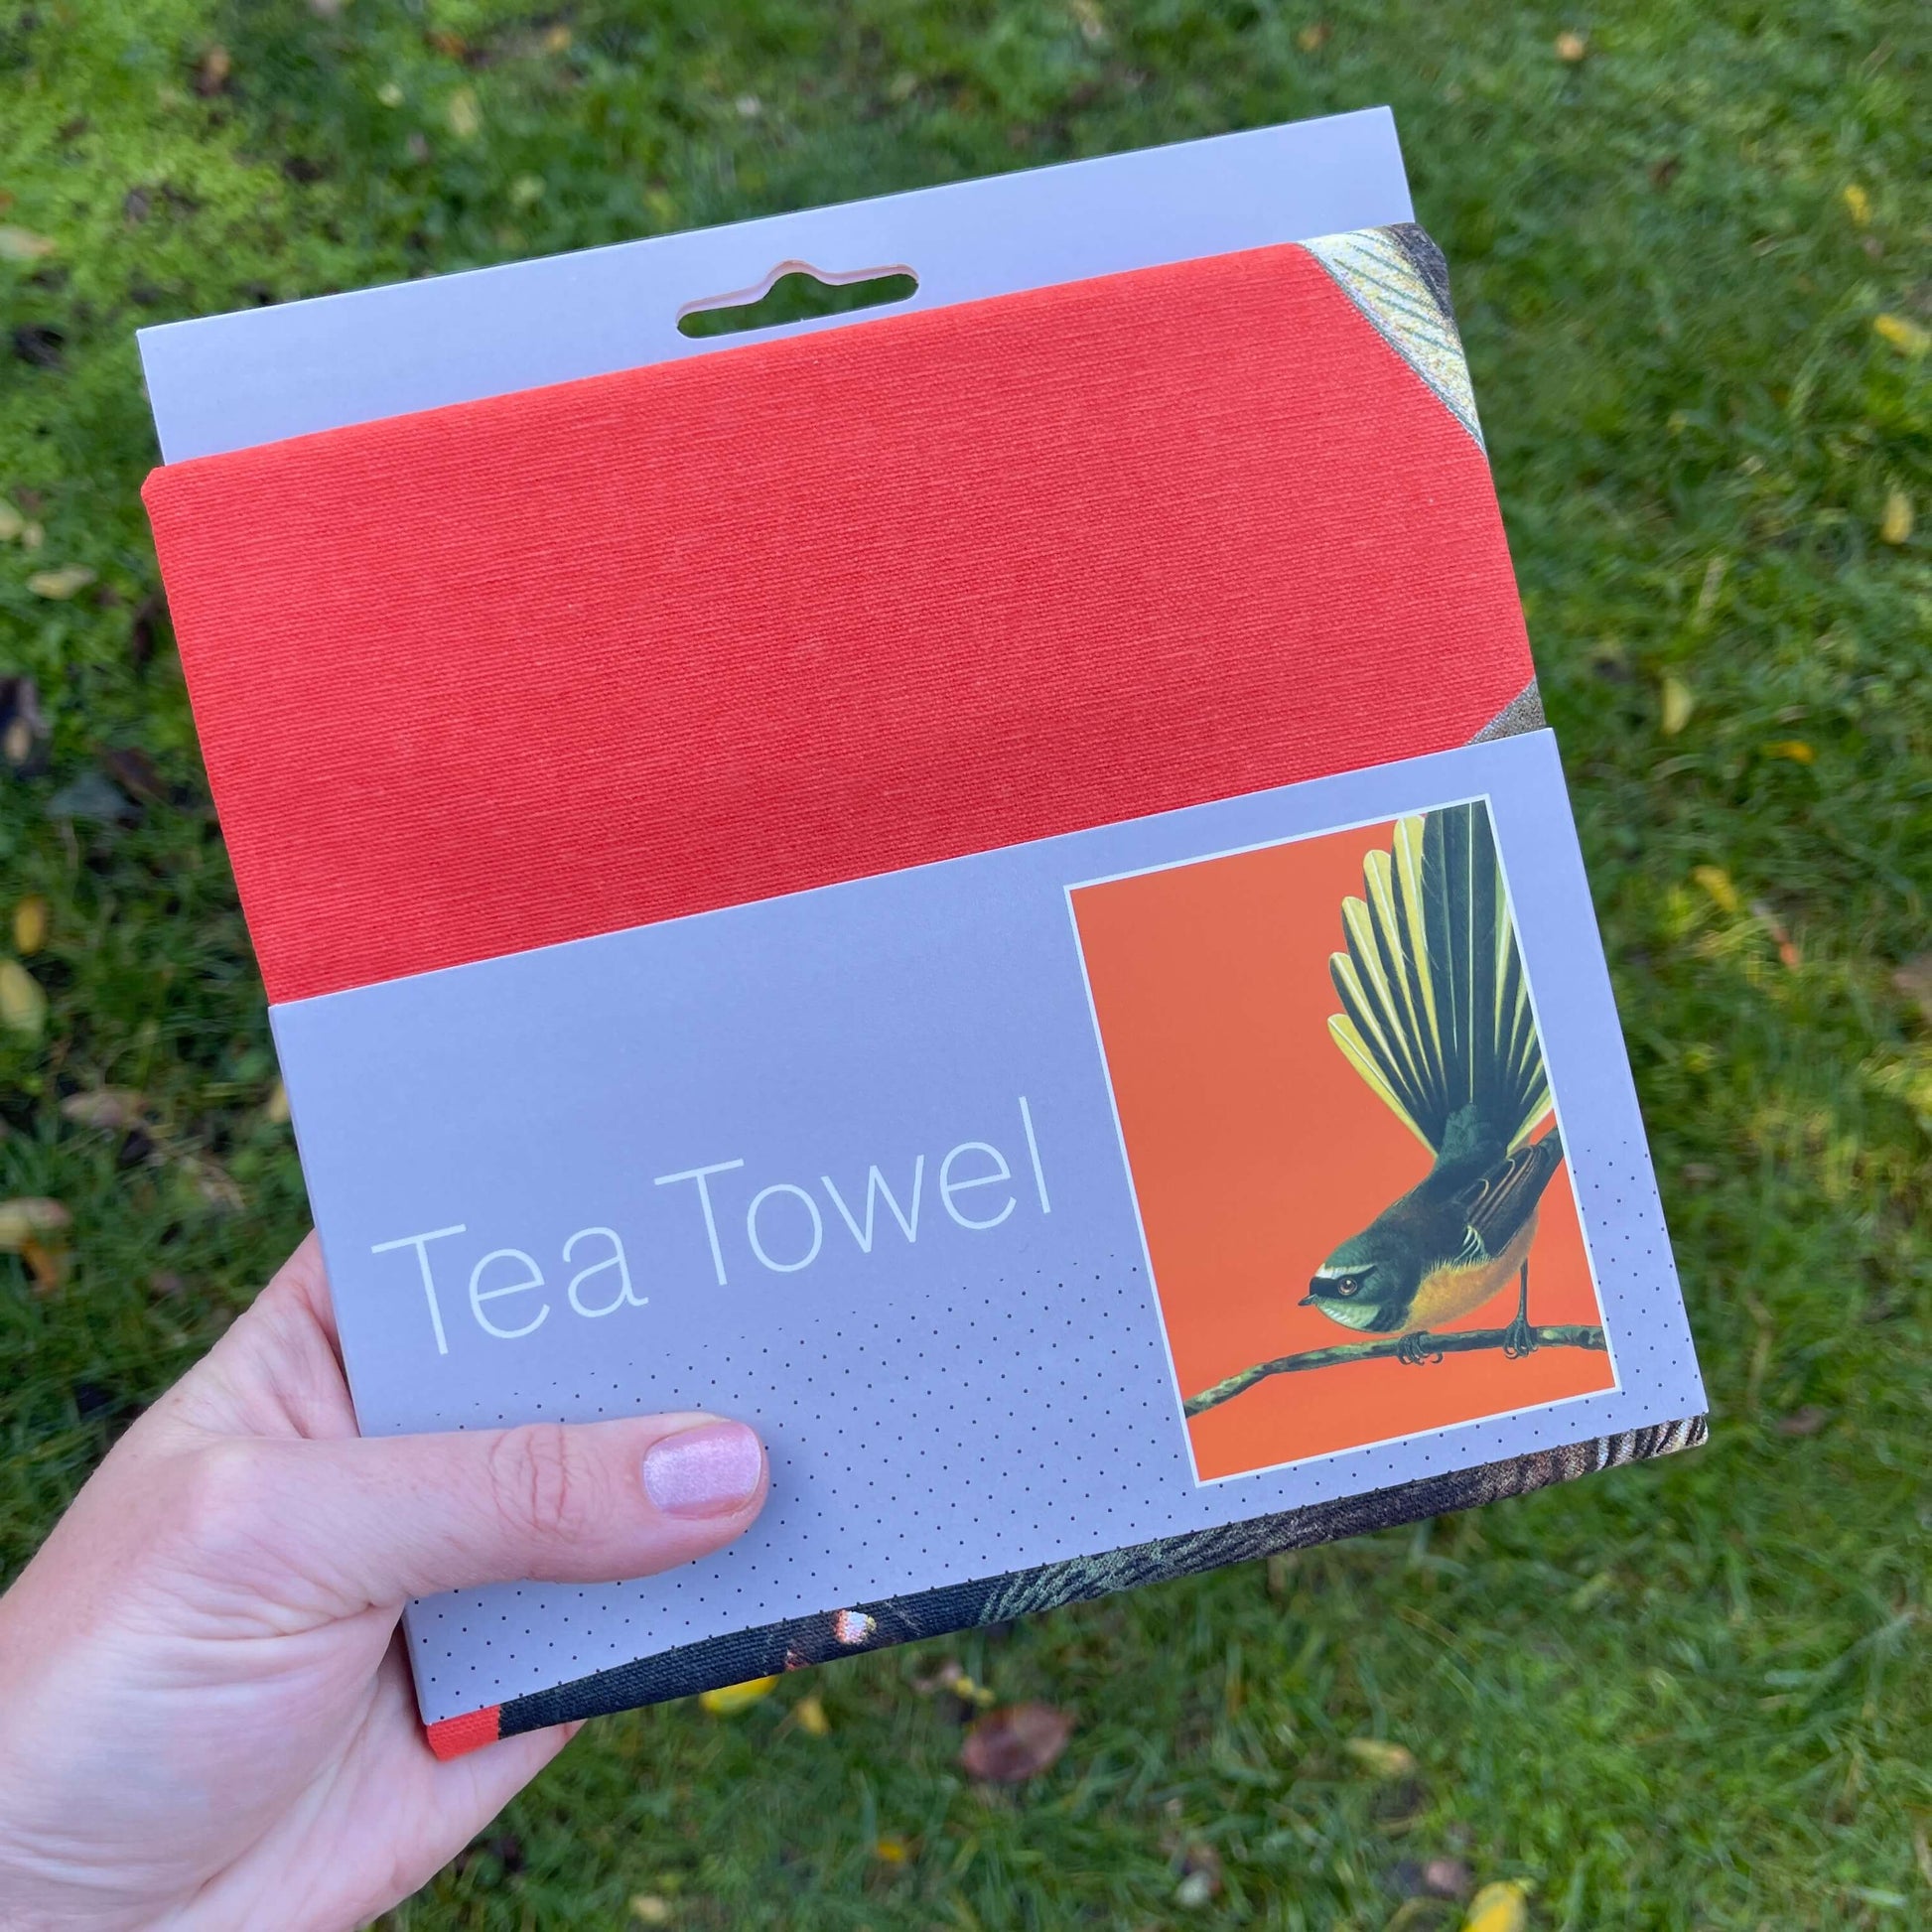 Bright orange Tea towel with a fantail on it.